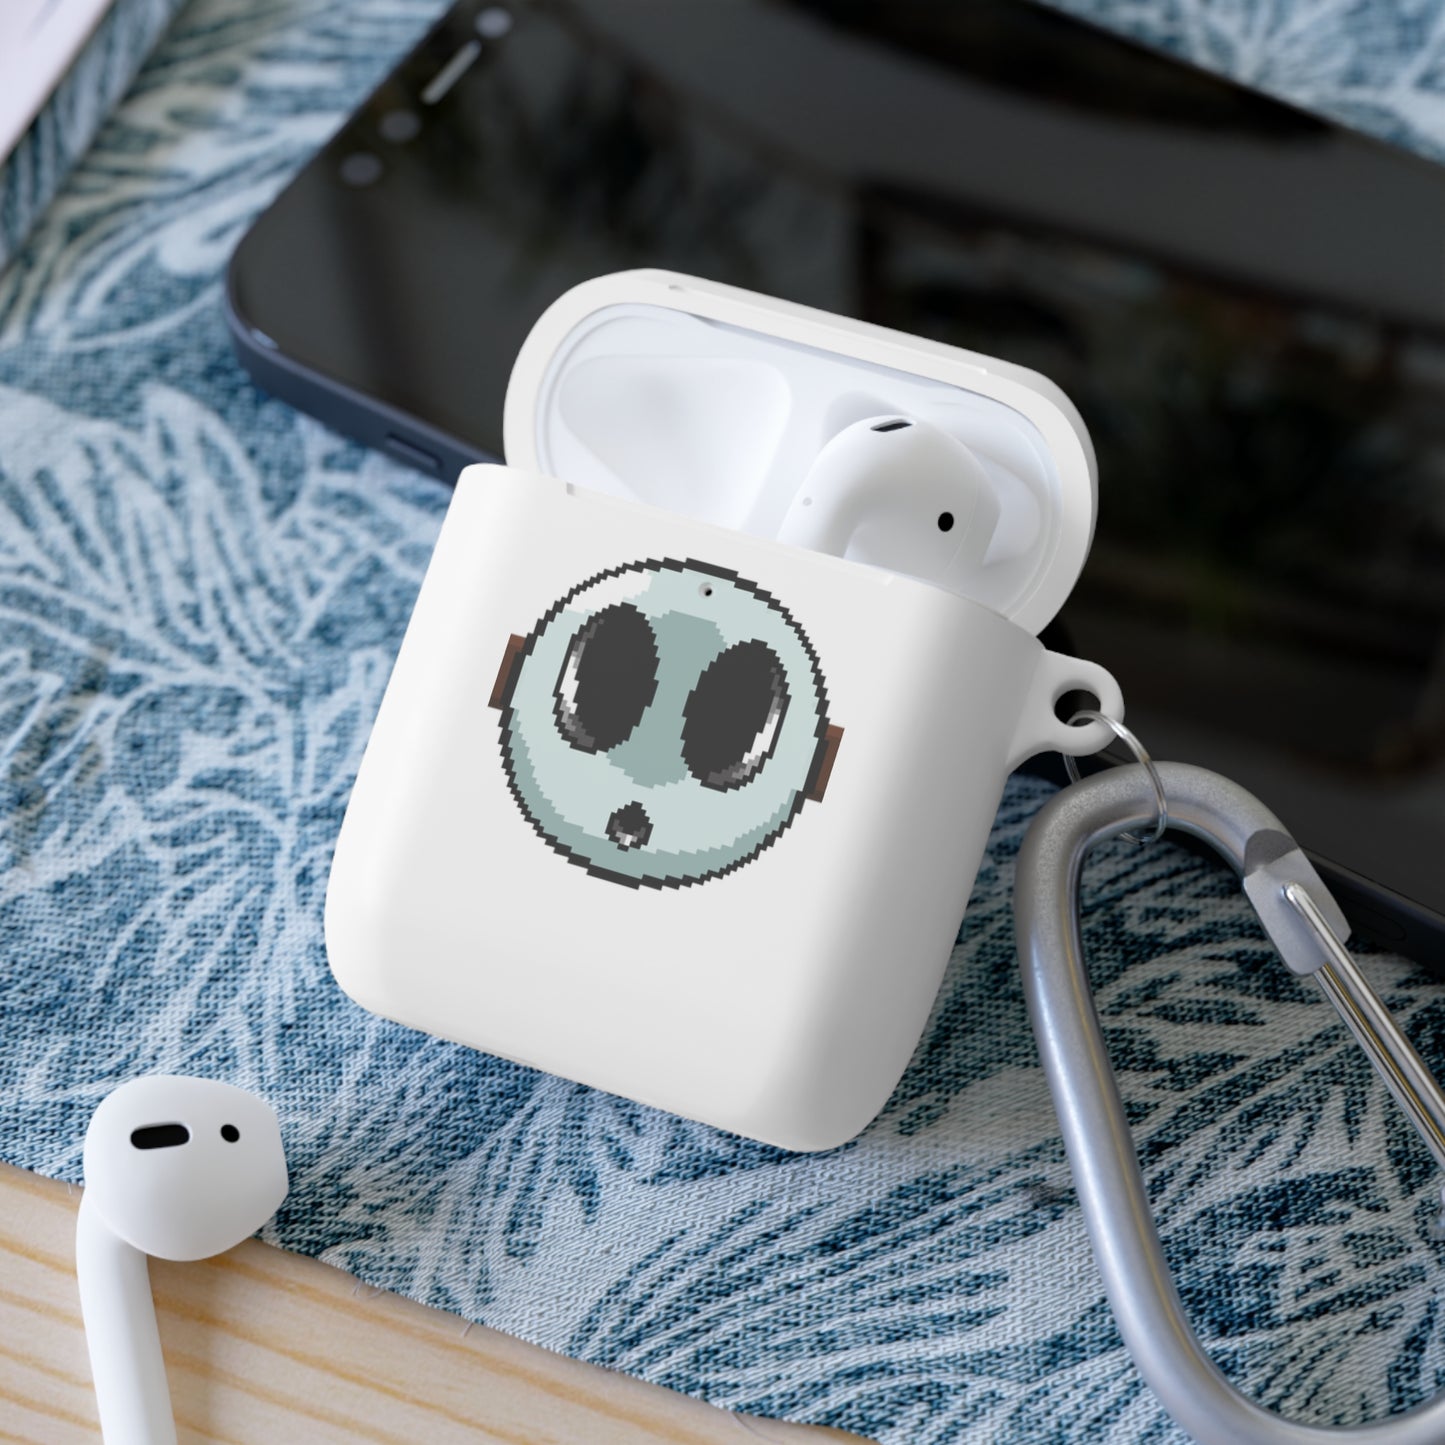 AirPods / AirPods Pro Case Cover - DBS